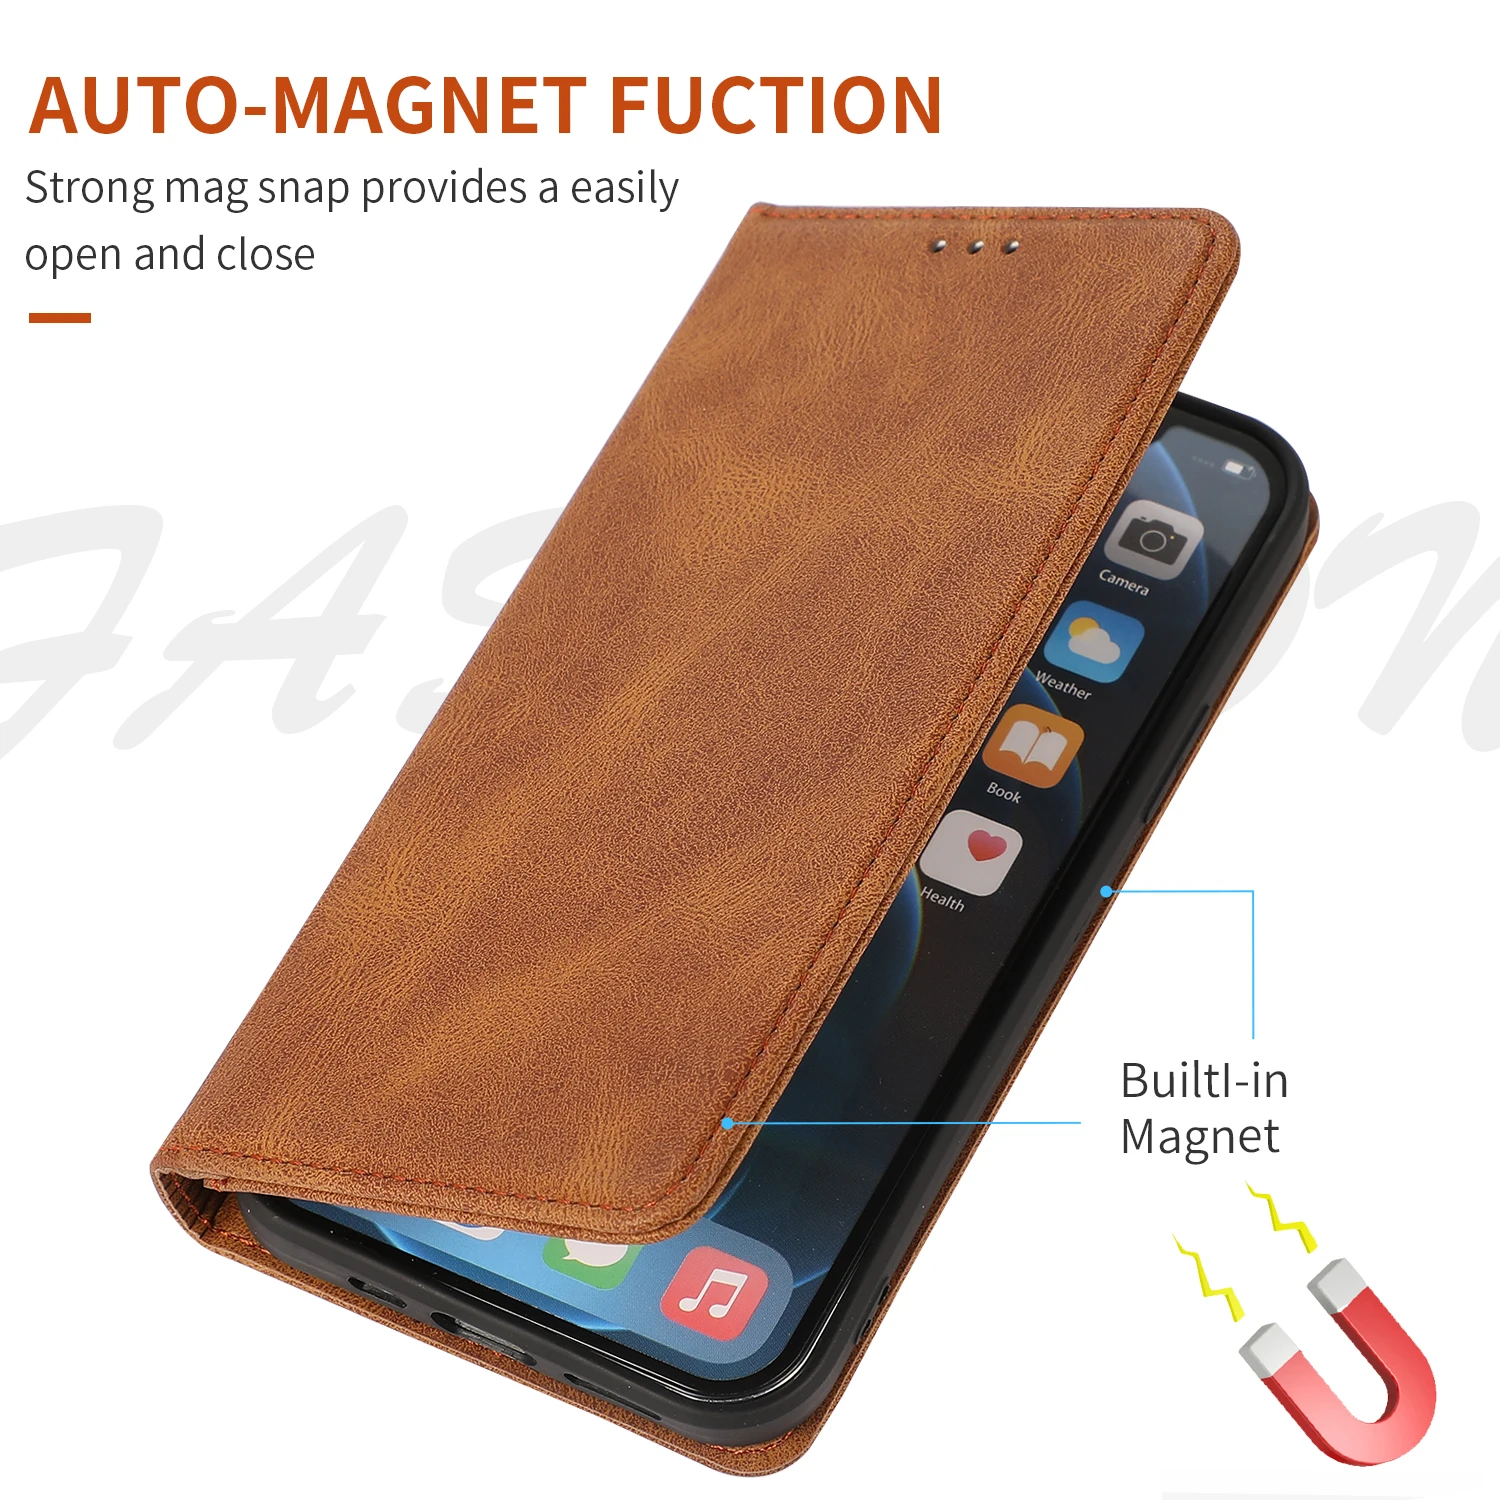 apple 13 pro max case Magnetic FLip Leather Phone Case For iPhone 13 12 11 Pro Max 12Mini Mobile Cover 7 8 6 6s Plus SE 2020 Stand Coque Wallet Funda best iphone 13 pro max case